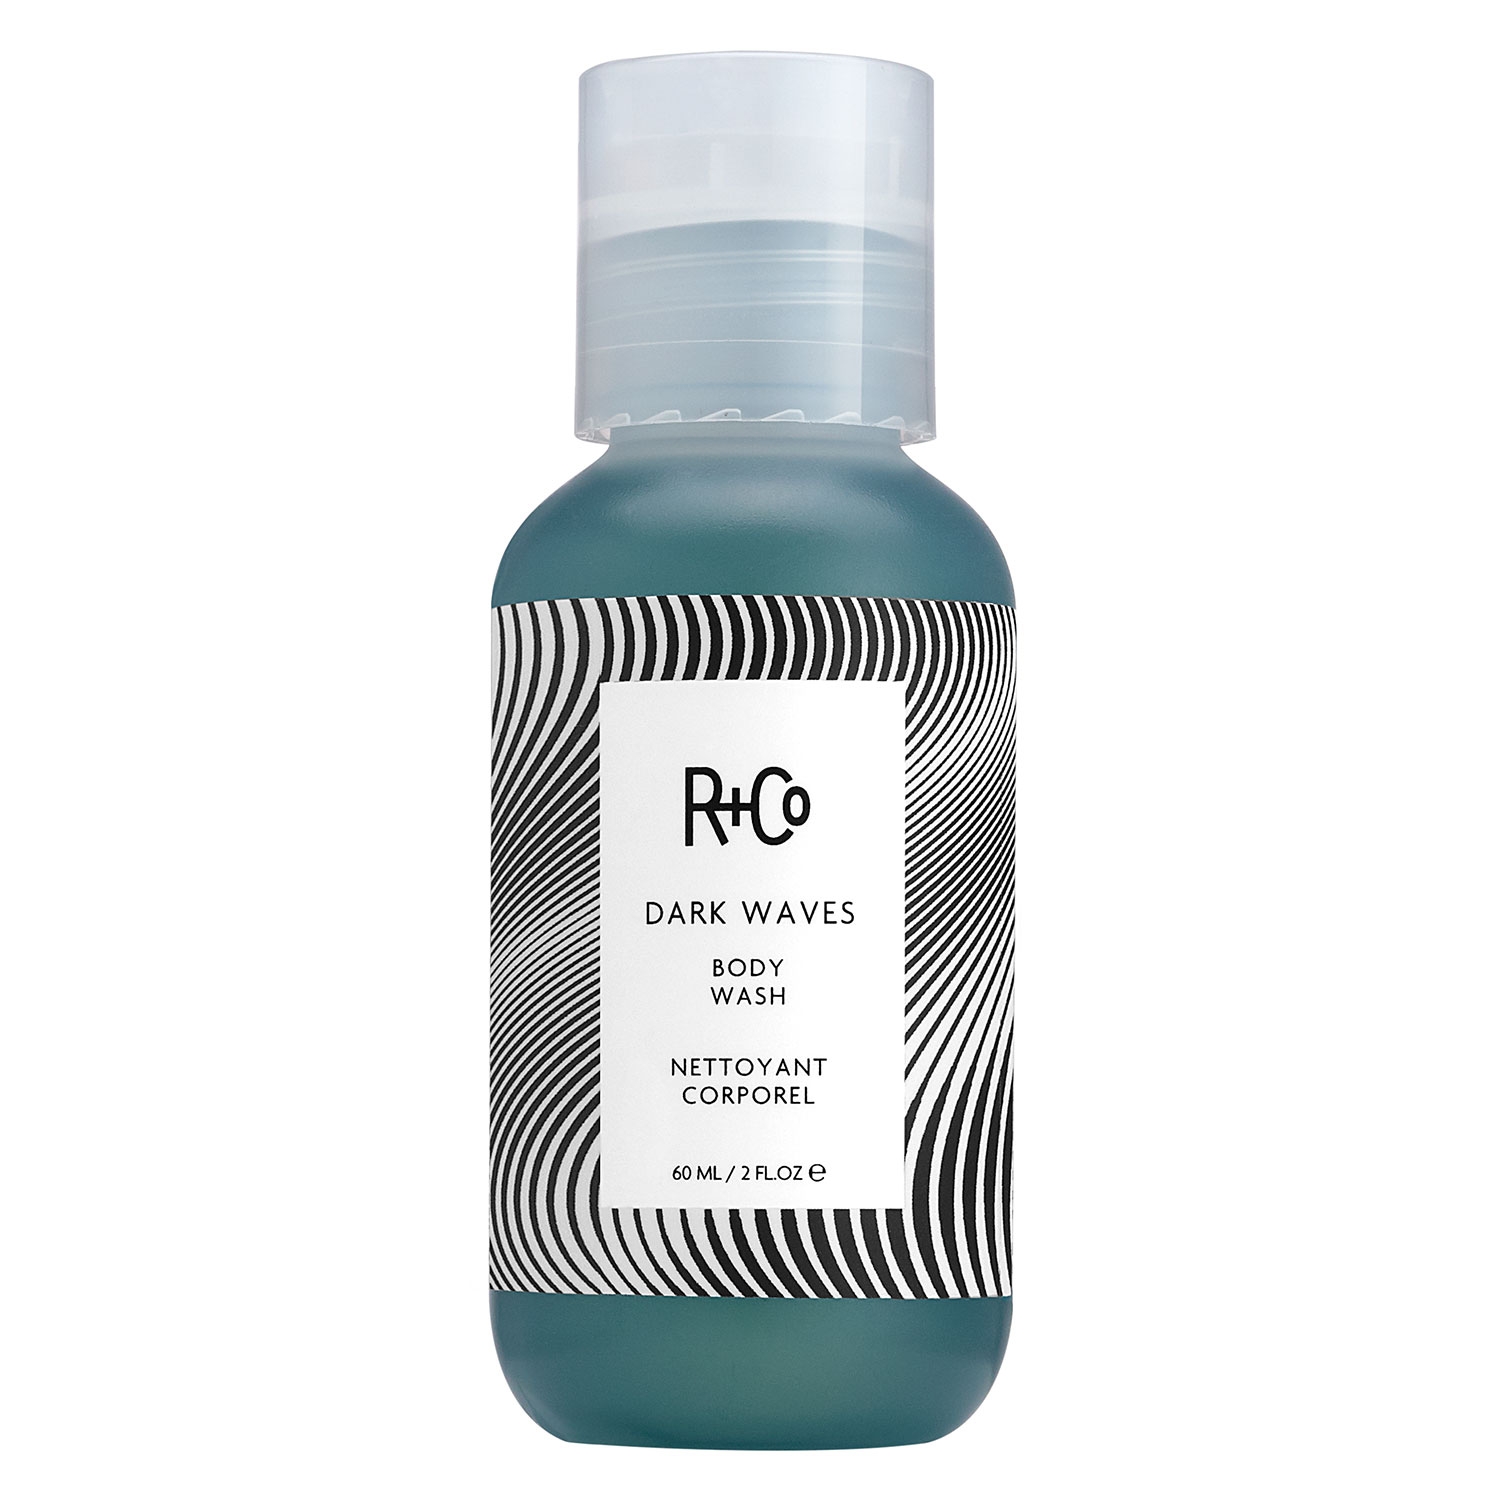 Product image from R+Co - Dark Waves Body Wash